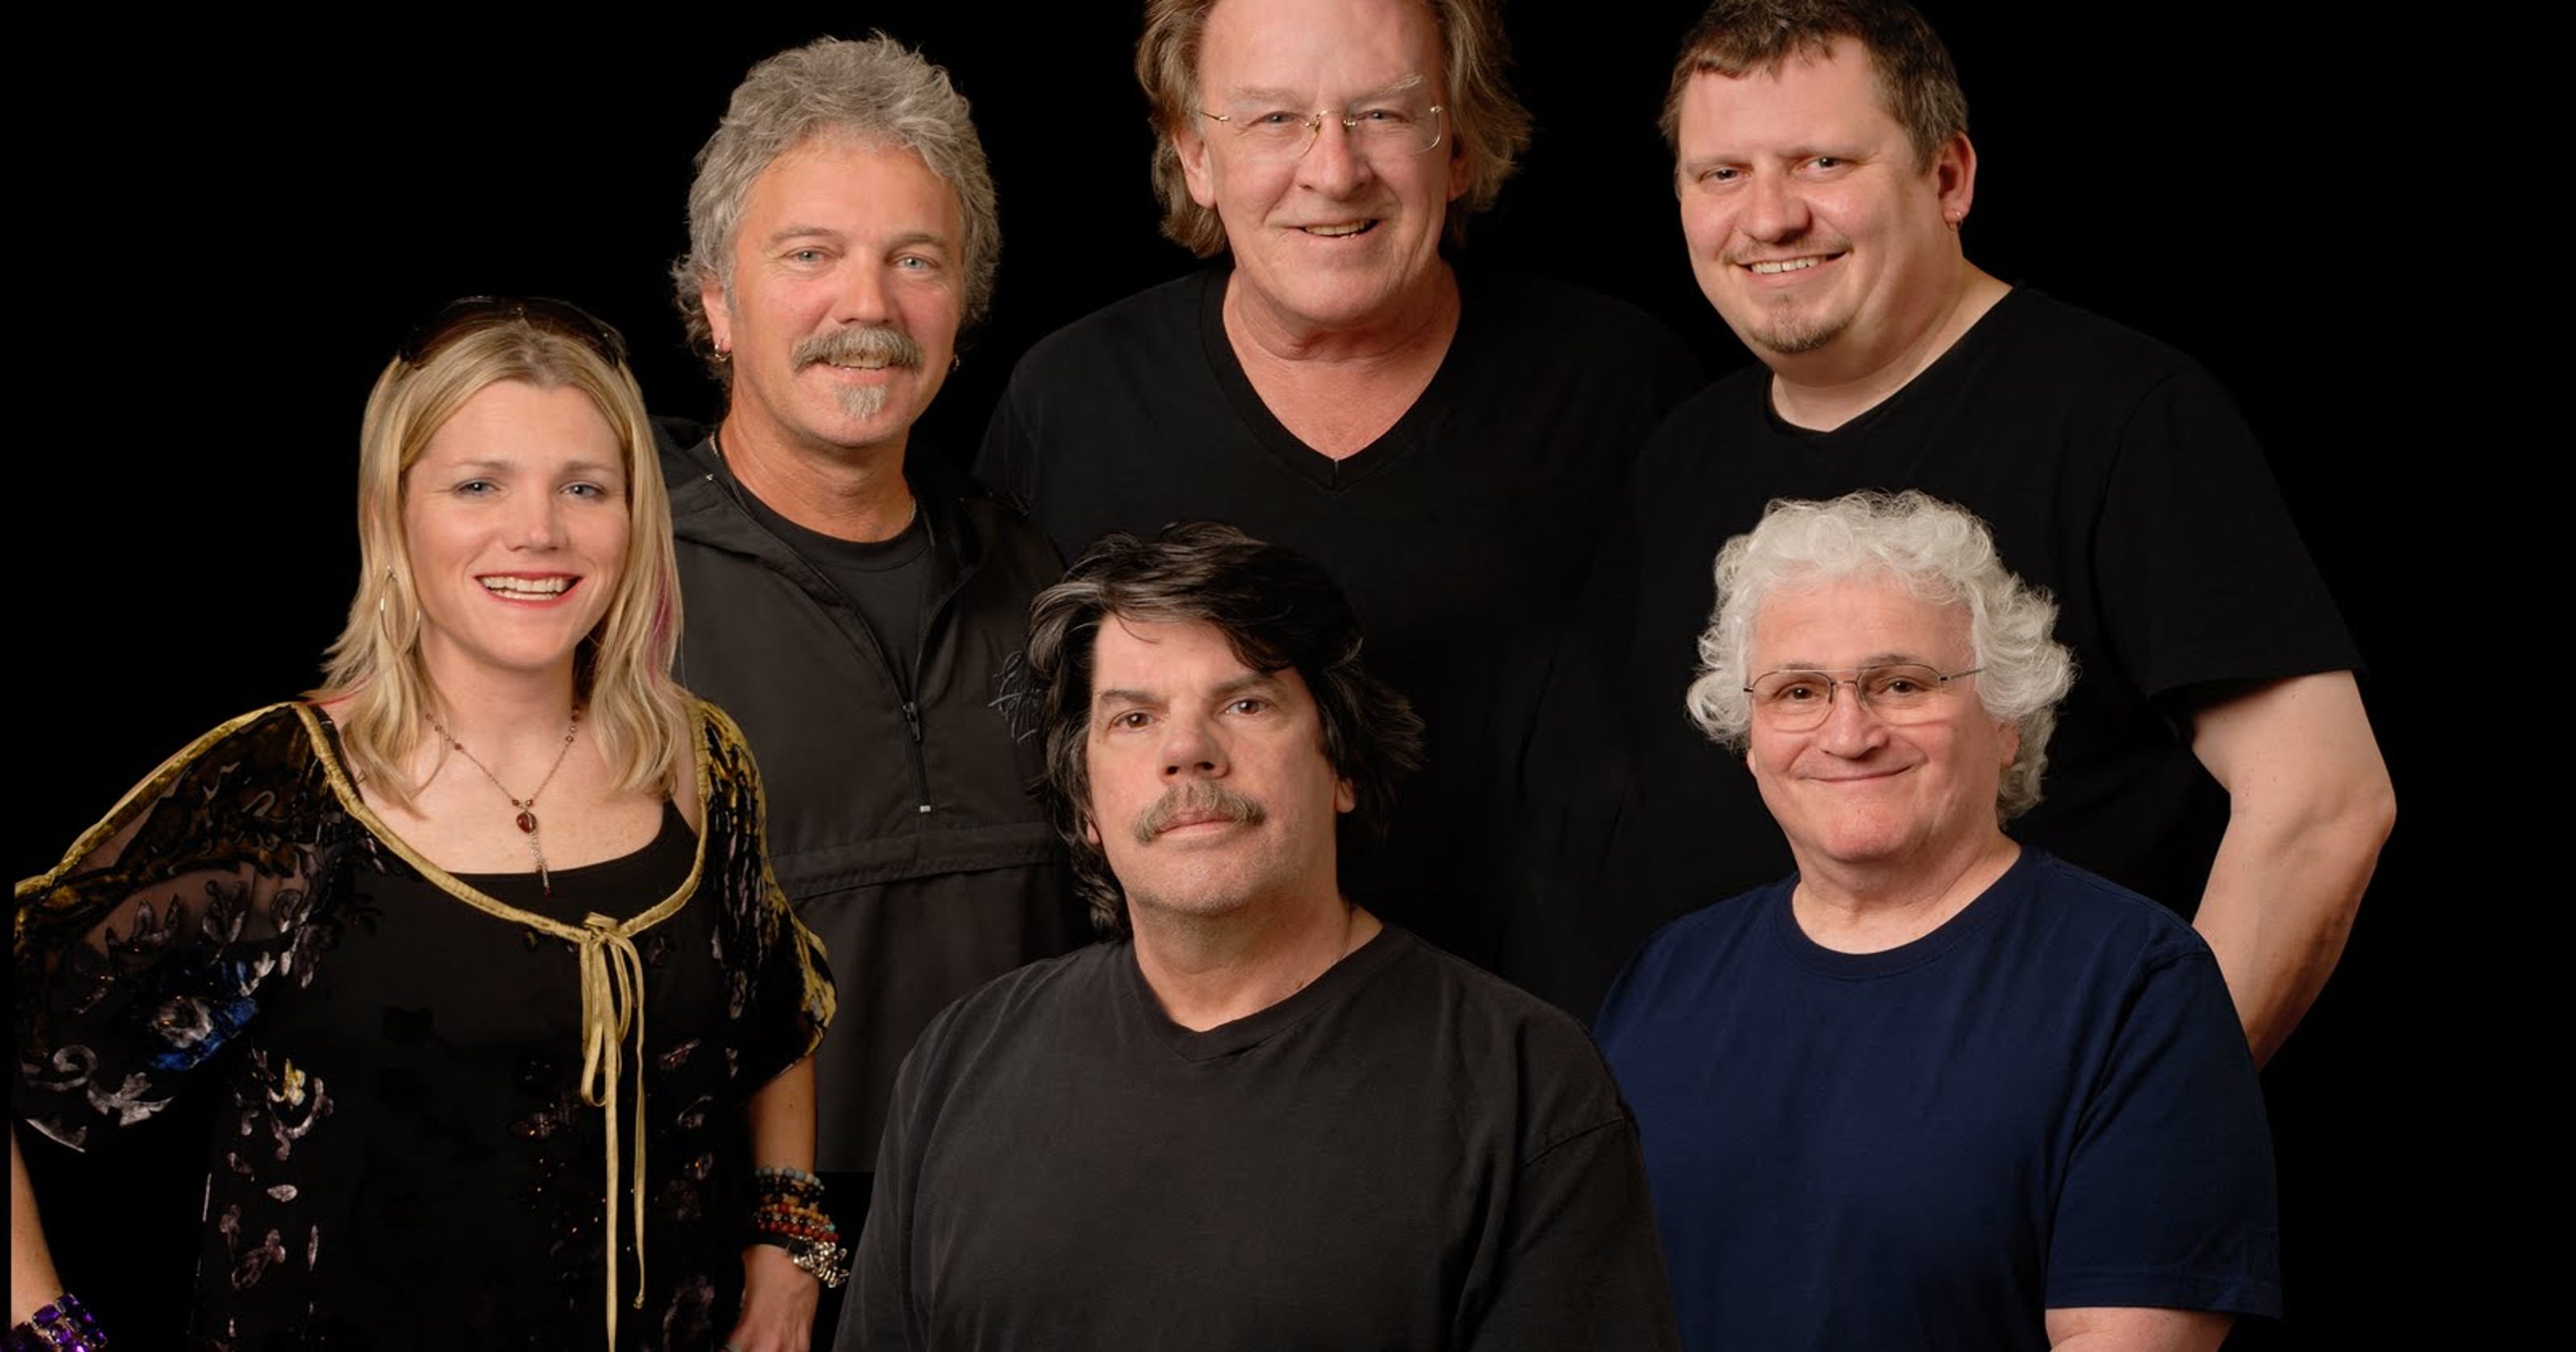 Catch Jefferson Starship this weekend at Tropicana in Atlantic City